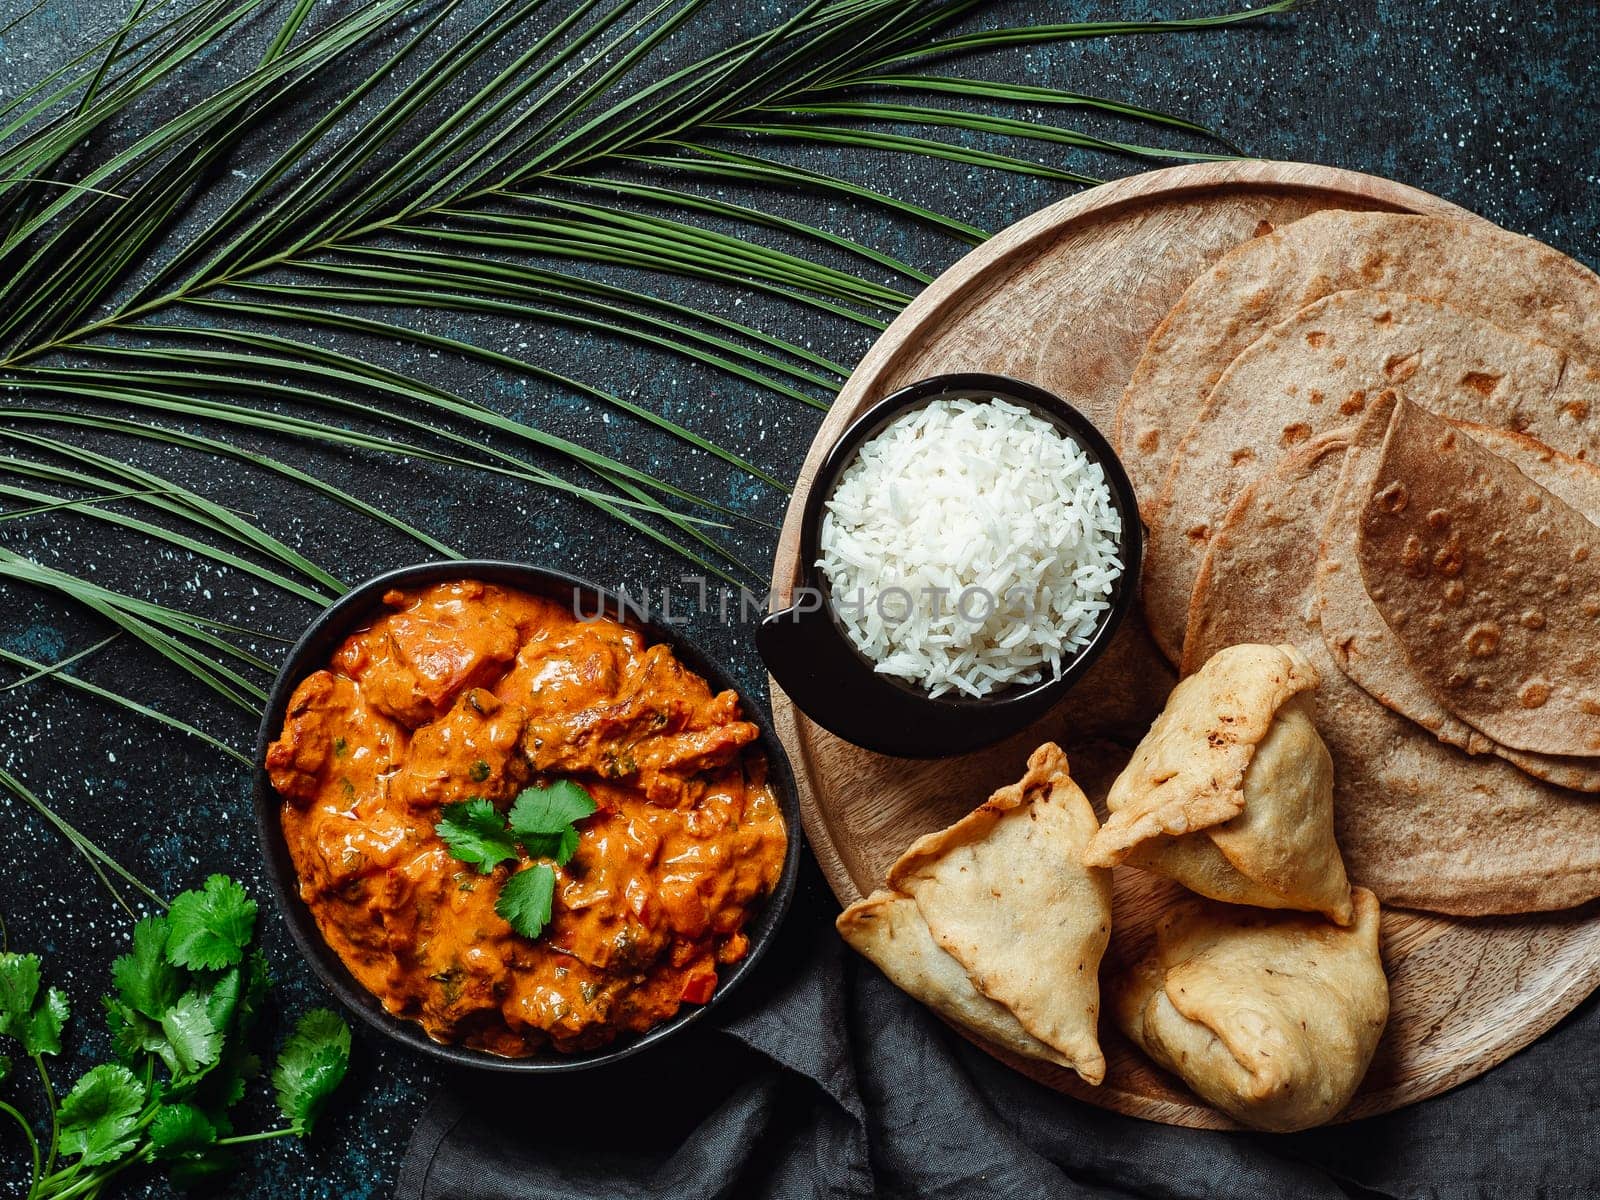 Indian cuisine dishes: tikka masala, rice, samosa, chapati,. Indian food on dark background with copy space. Assortment indian meal top view or flat lay.